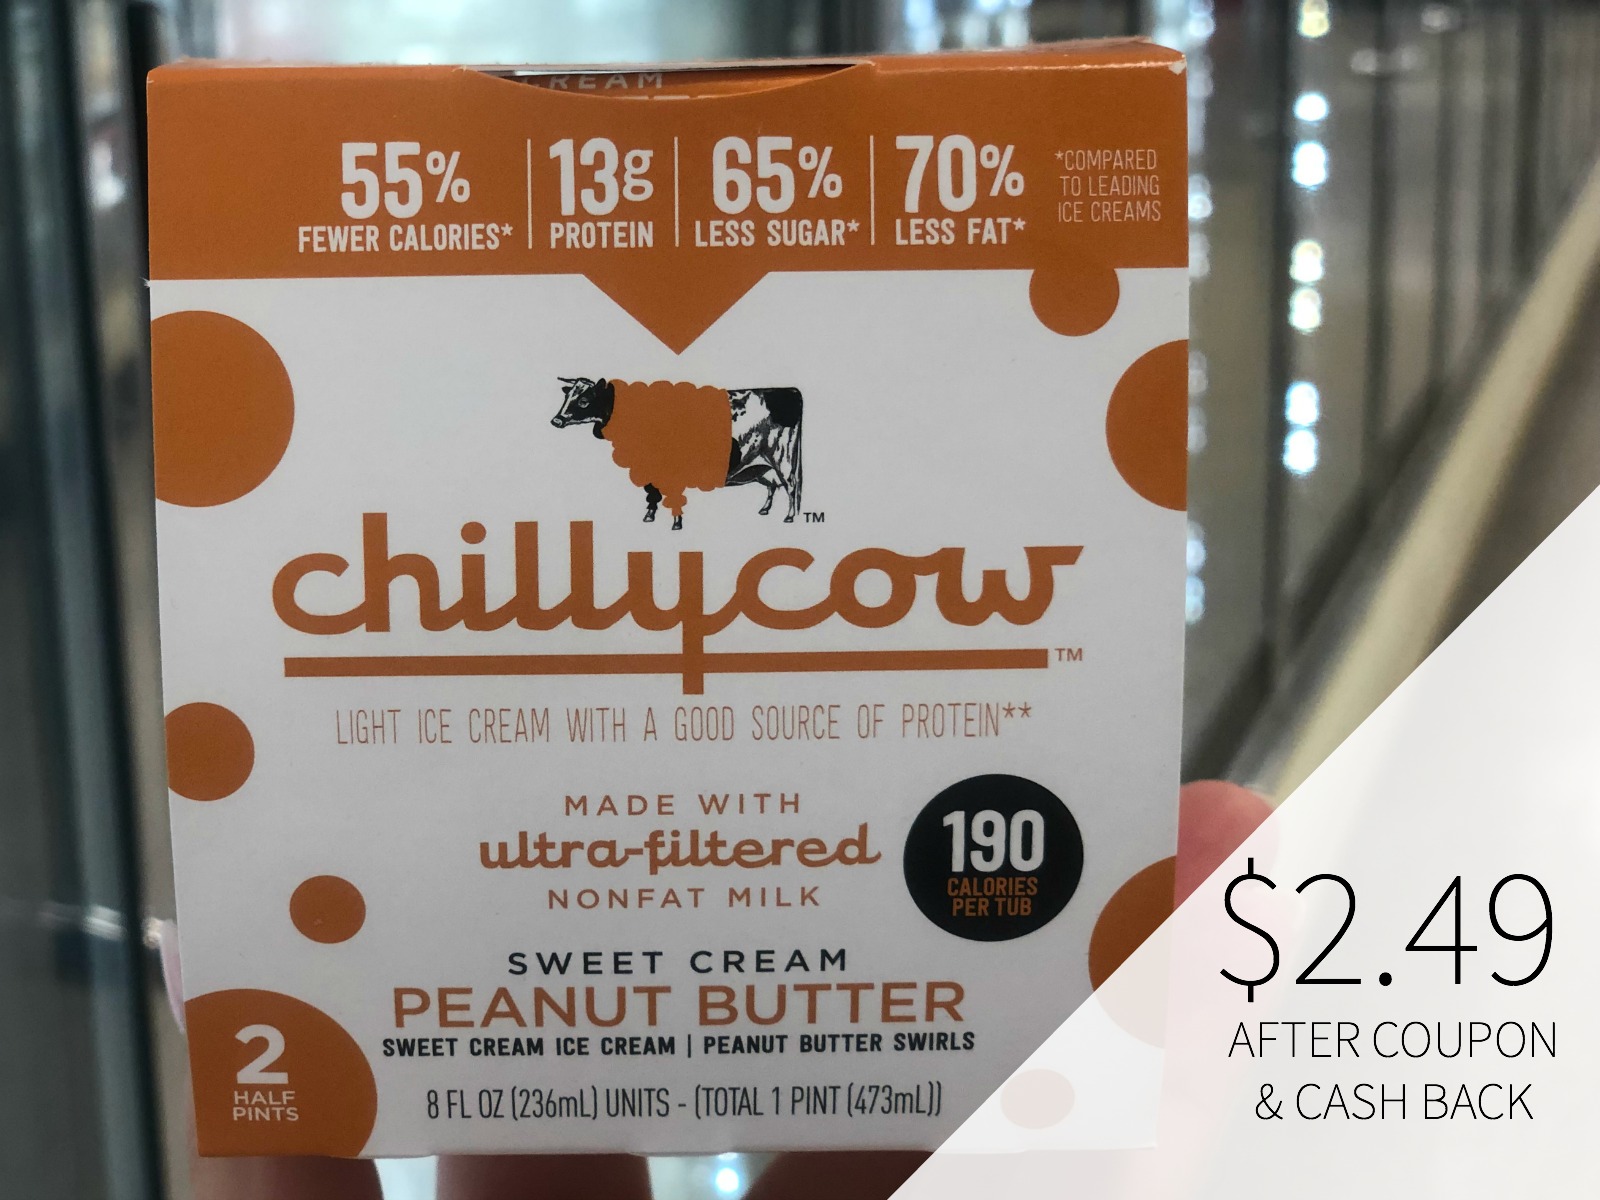 Chilly Cow Ice Cream As Low As $2.99 At Publix - Half Price! on I Heart Publix